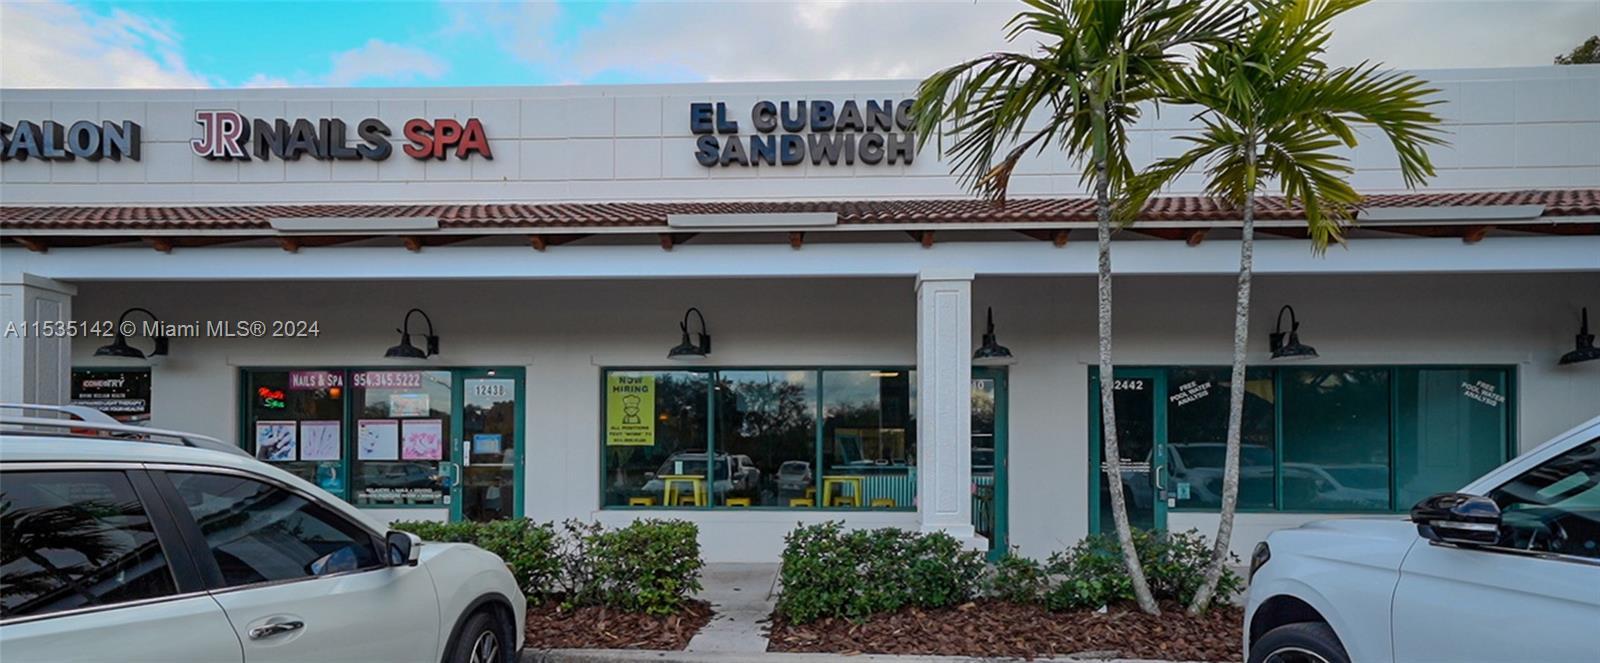 12430 Atlantic Blvd, Coral Springs, Bar/Lounge Only,  for sale, Sandra Benkahla, The 305 Agency